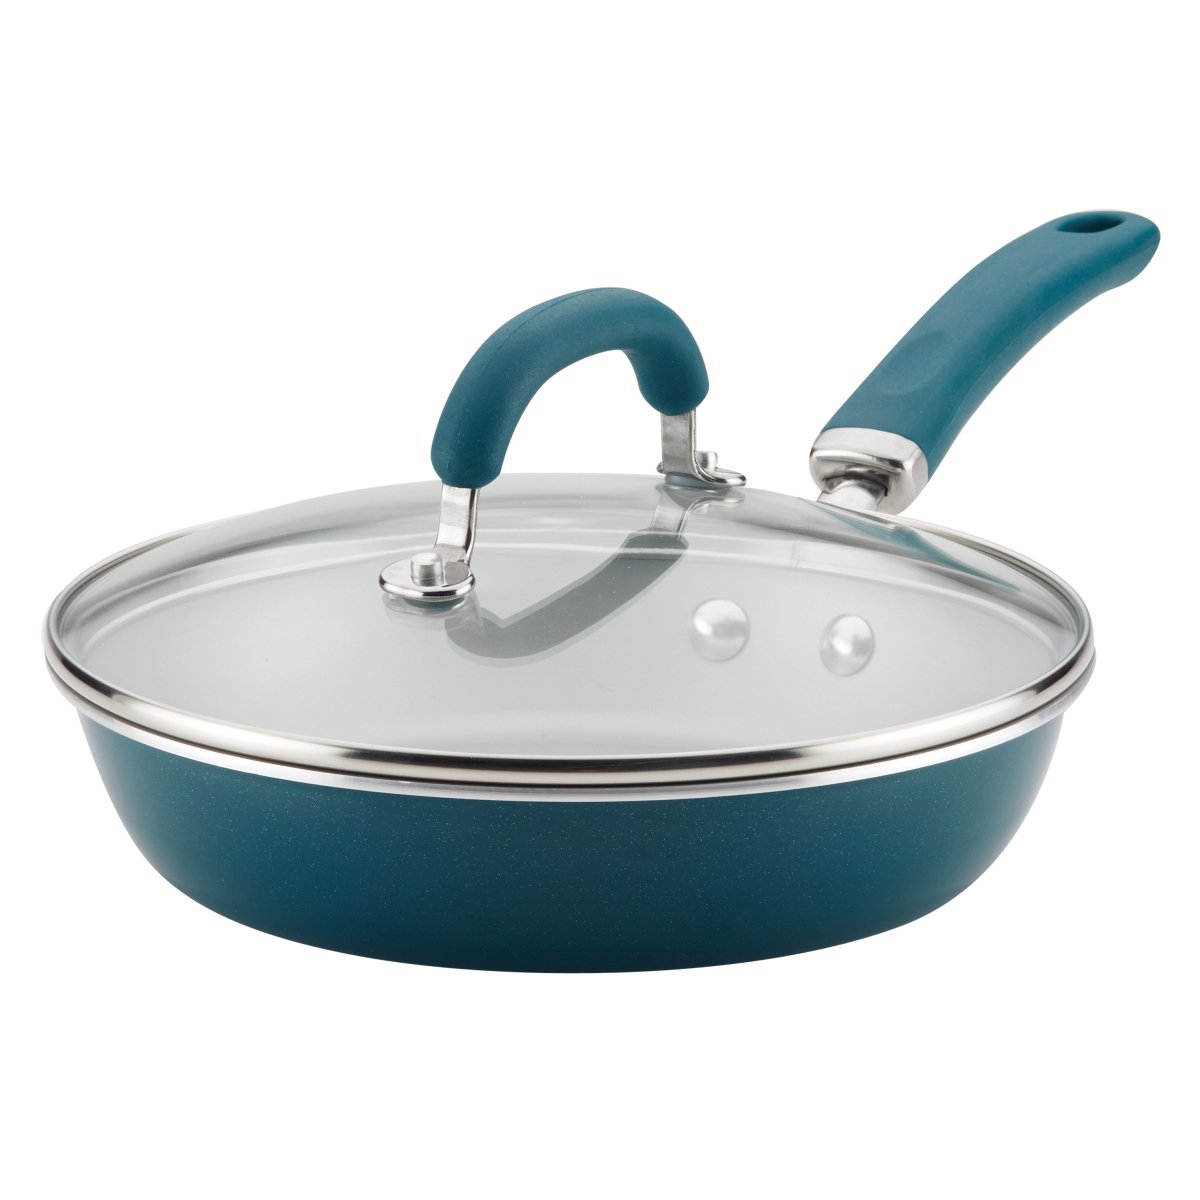 12011 Create Delicious Aluminum Nonstick Covered Deep Skillet, 9.5 In. - Teal Shimmer